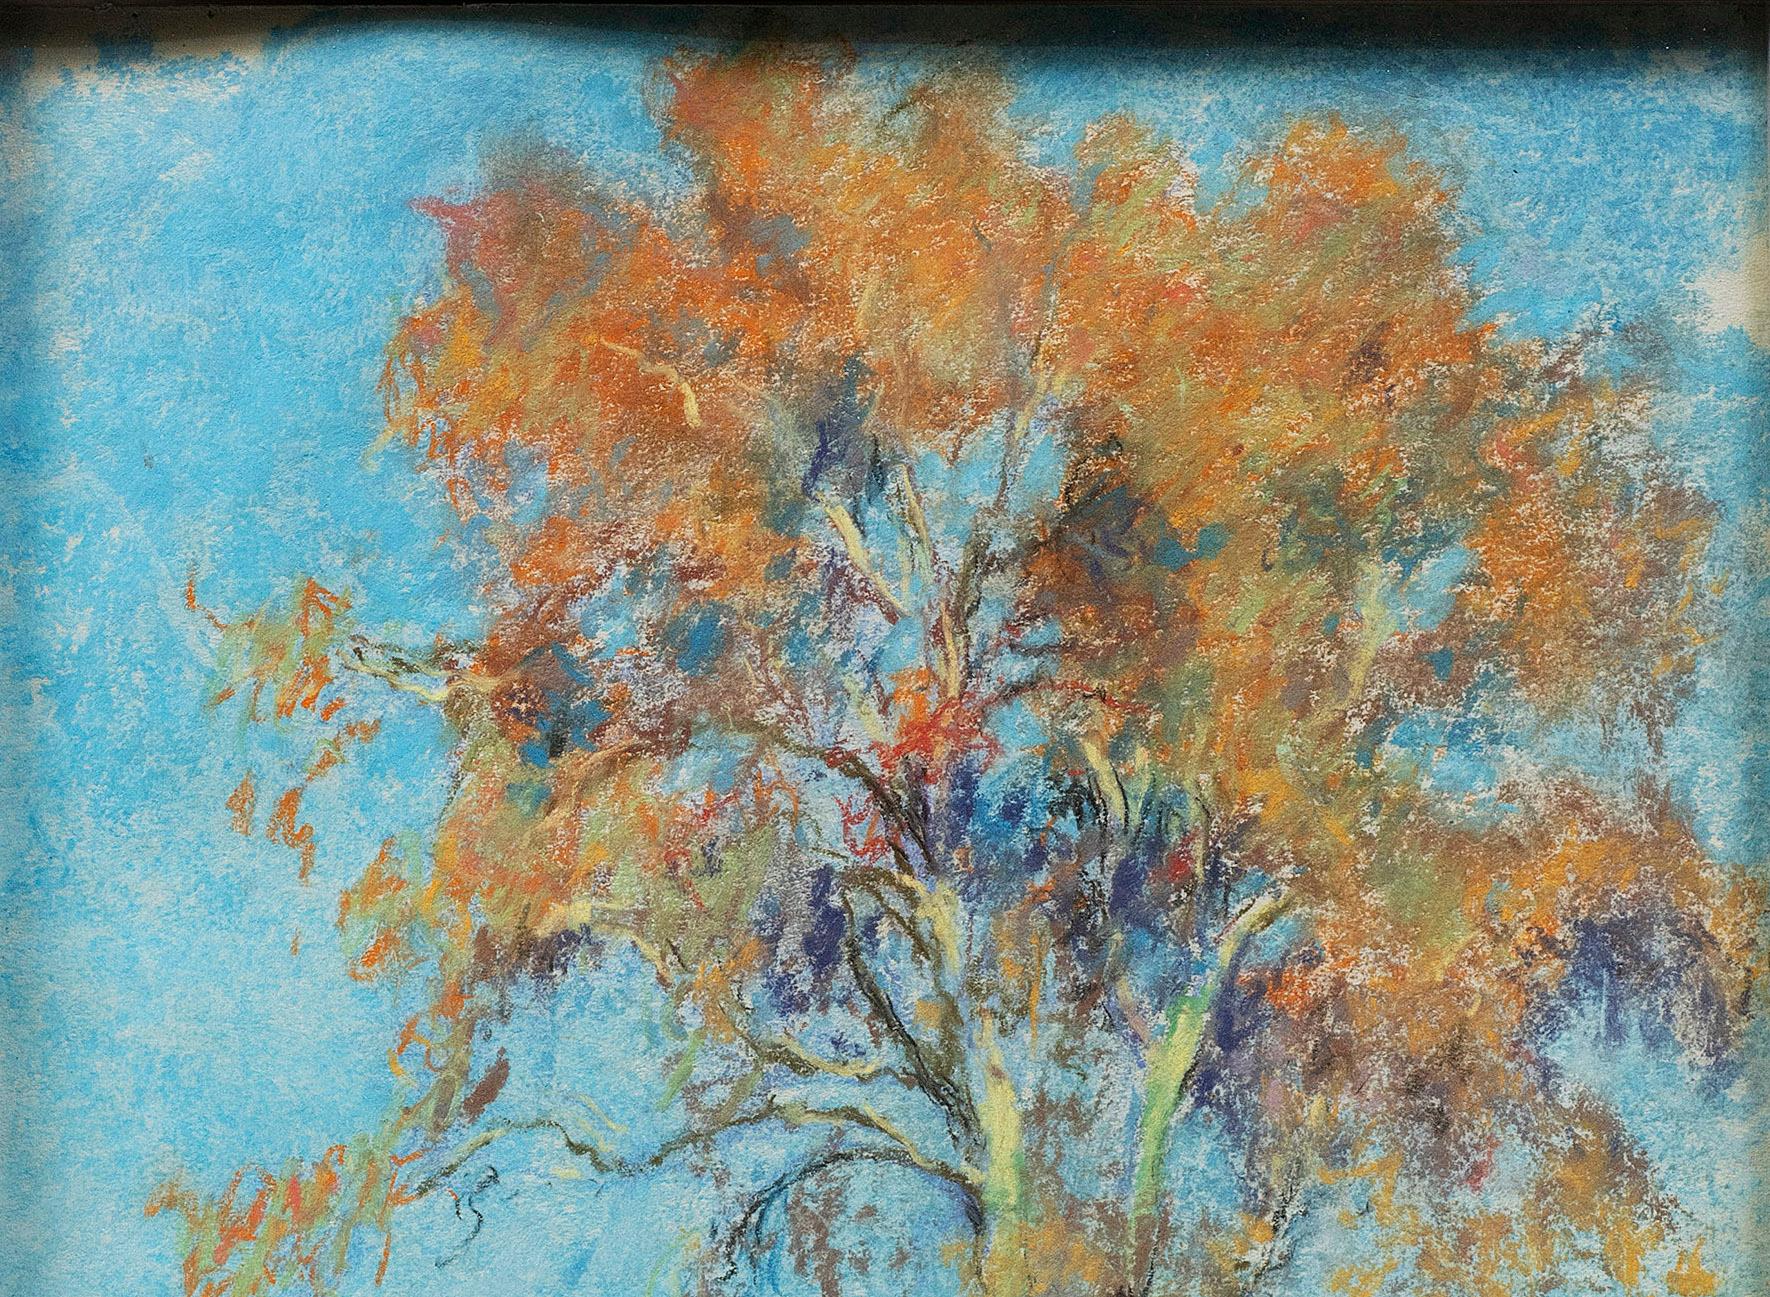 Arbre à l'Automne à Saint Paul
Raymond Thibesart (France, 1874-1968)
Circa 1920's
Pastel on paper, signed lower left
12 x 9 inches


Raymond Thibesart was born into an affluent family on May 2nd, 1874. As a small child, Thibesart’s family moved to a